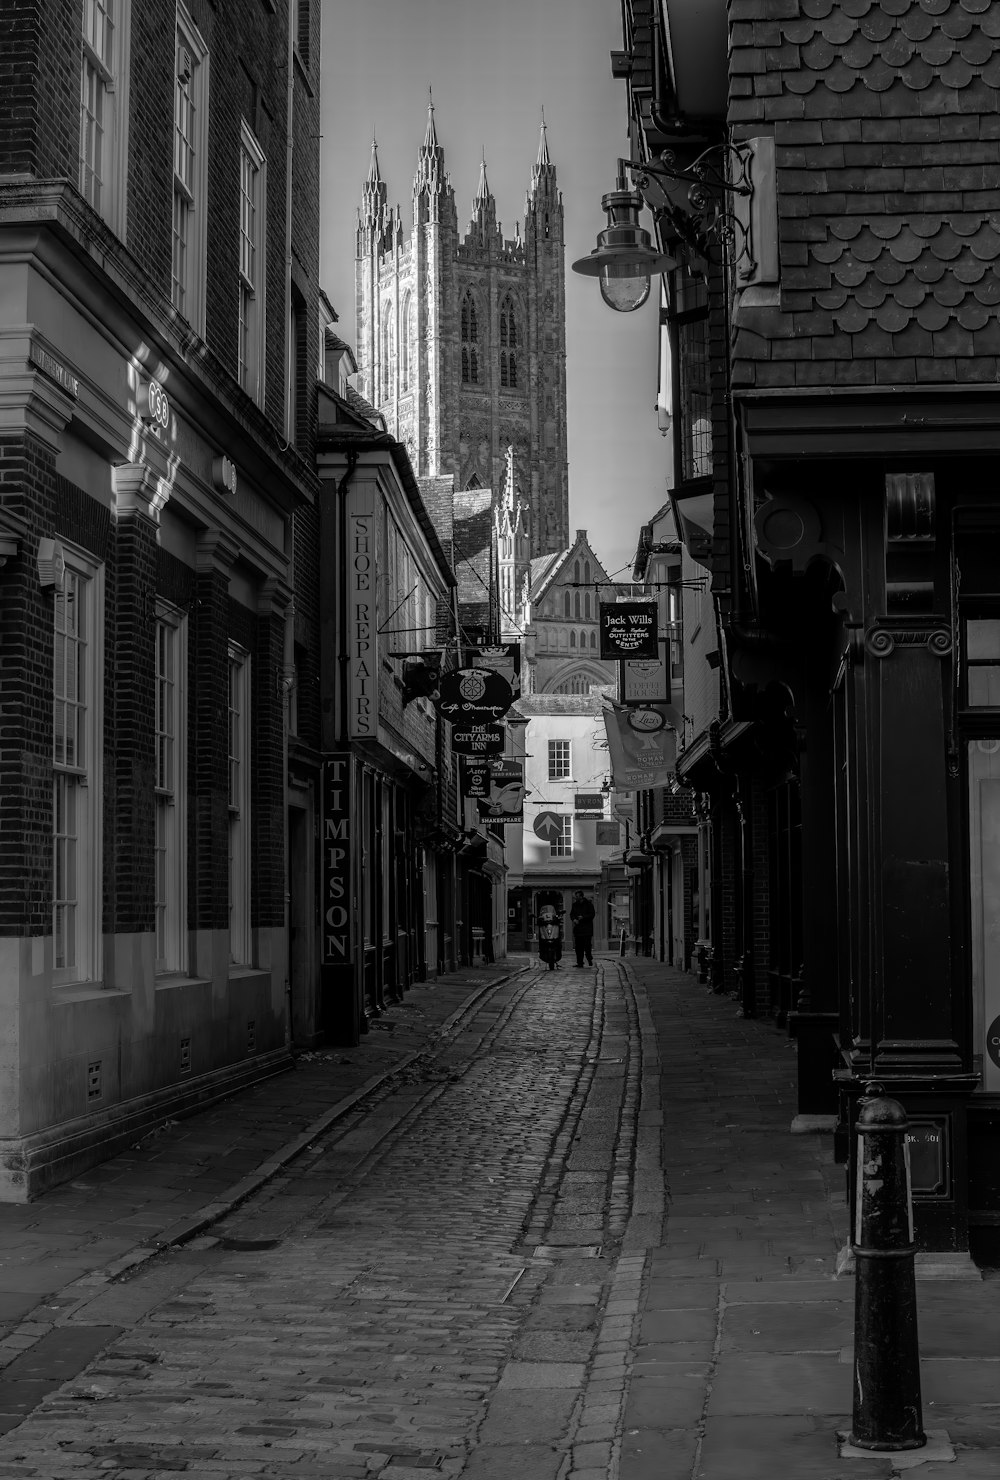 grayscale photo of a street in between buildings